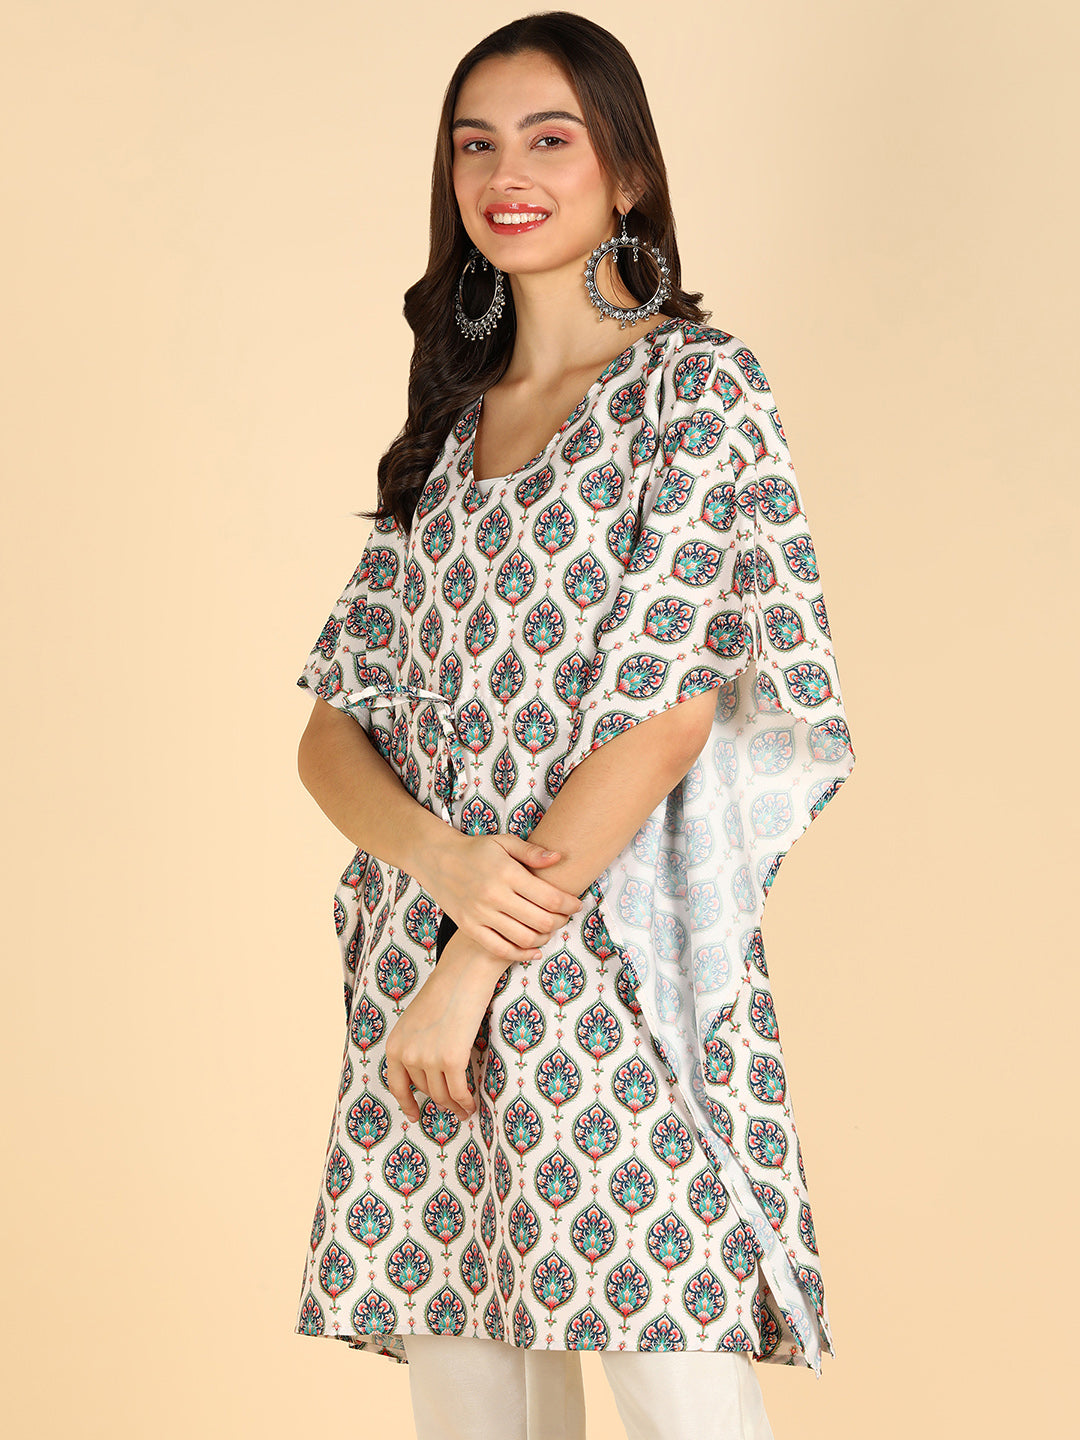 Floral Printed Off White Kafthan Kurta With Tassel Details